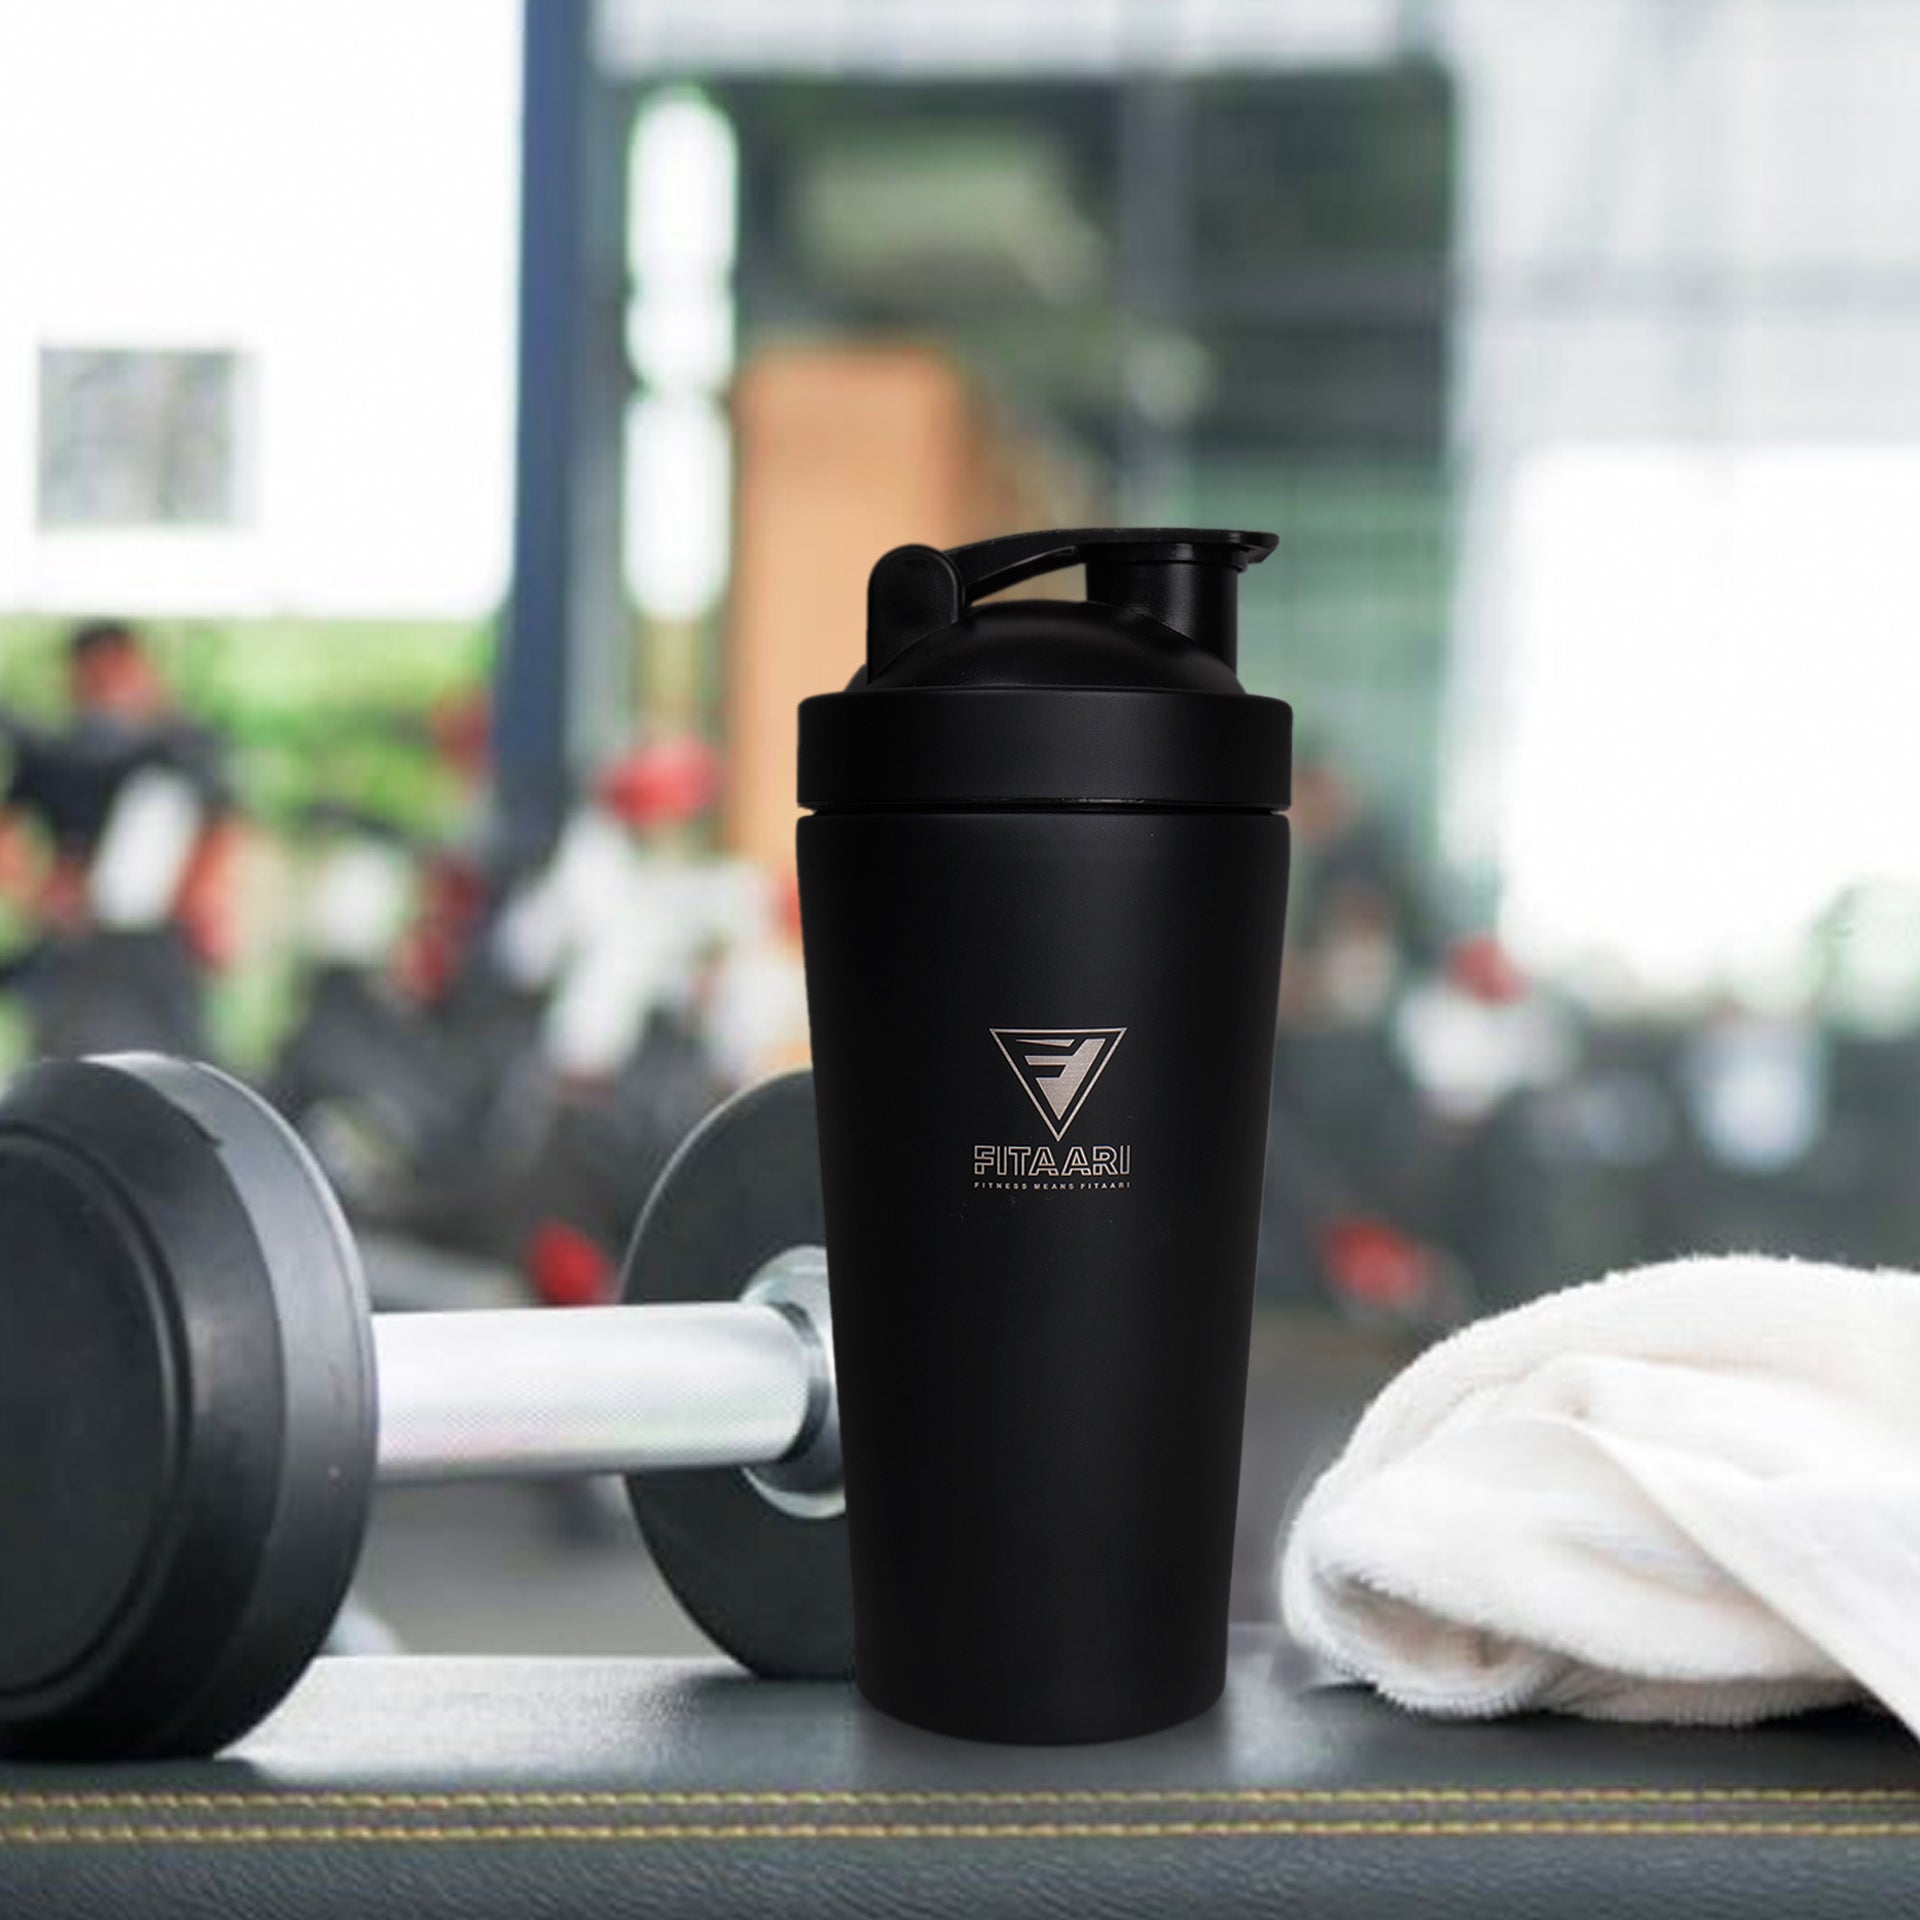 Beyond Basic Blending: Unleashing the Potential of Gym Shakers